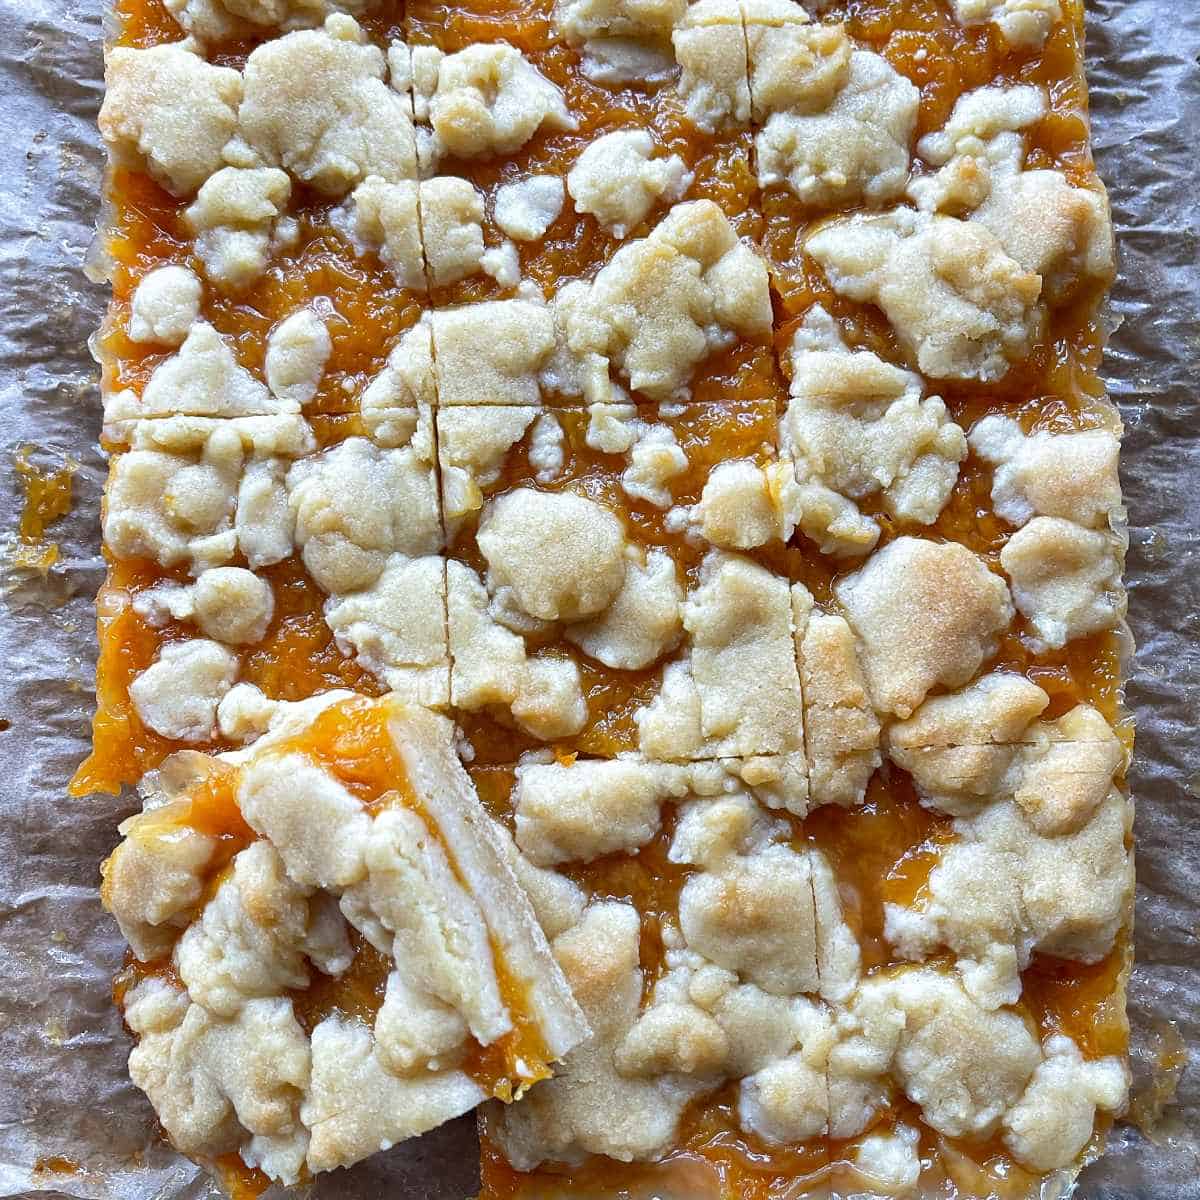 Baked Apricot Slice cut into pieces still on lined baking paper. One piece has been turned slightly to show the cooked through apricot.